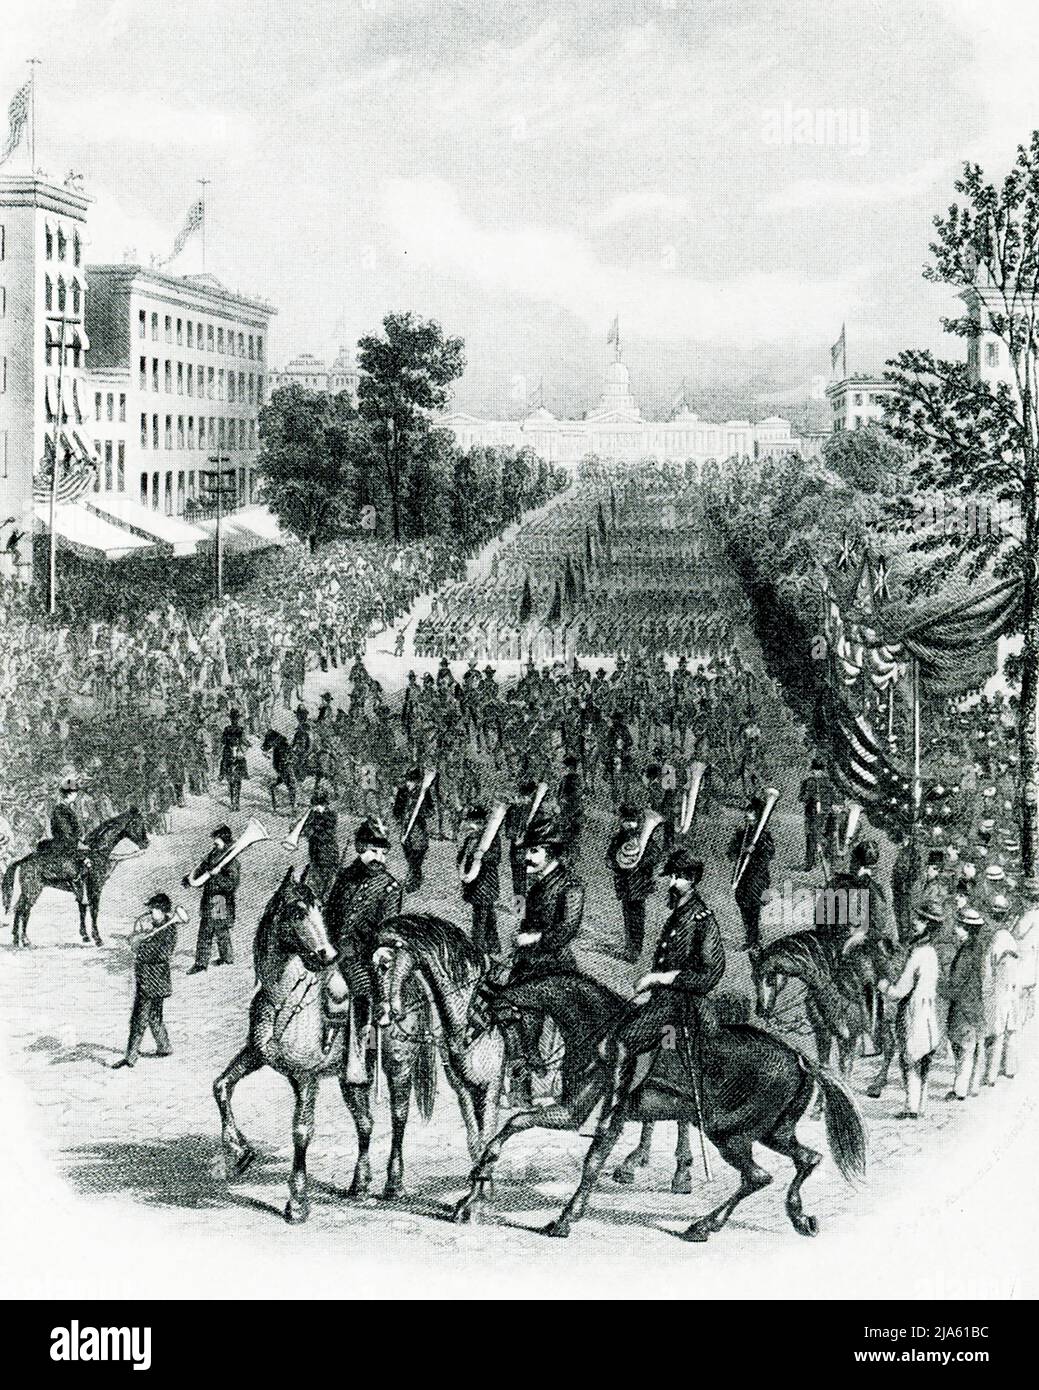 The 1903 caption reads: 'Grand Review at Washington May 24 and 25, 1965.' On May 23 and 24, 1865, before the soldiers were mustered out of the Union Army, a Grand Review of the Armies was held in Washington, D.C., to honor the victorious troops. President Andrew Johnson also hoped to elevate the mood of a city that was devastated by the loss of President Abraham Lincoln Stock Photo